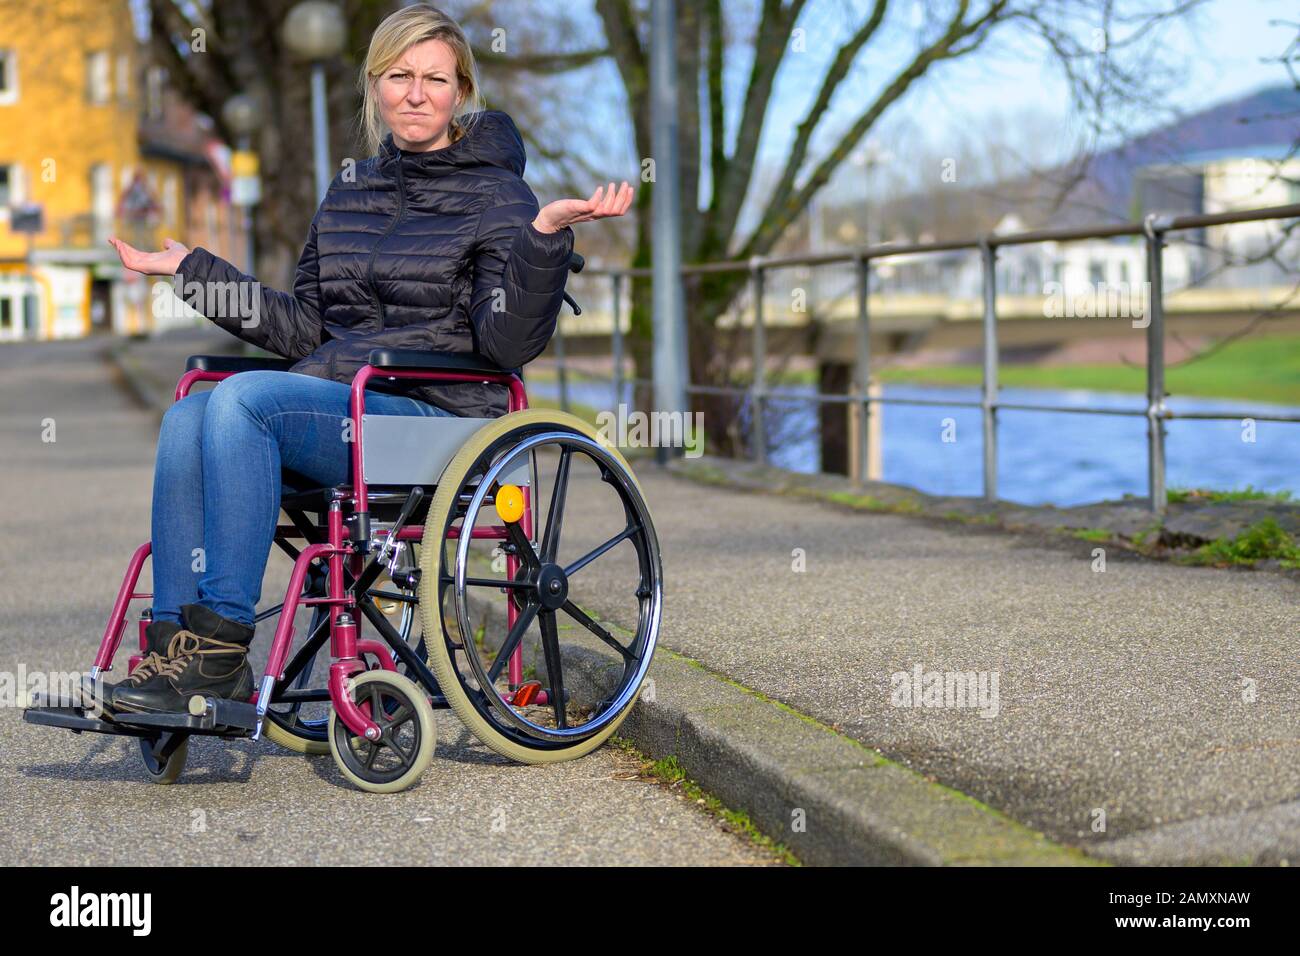 Disabled woman in a wheelchair shrugging her shoulders with a wry smile as she sits waiting in a quiet urban street alongside a river Stock Photo